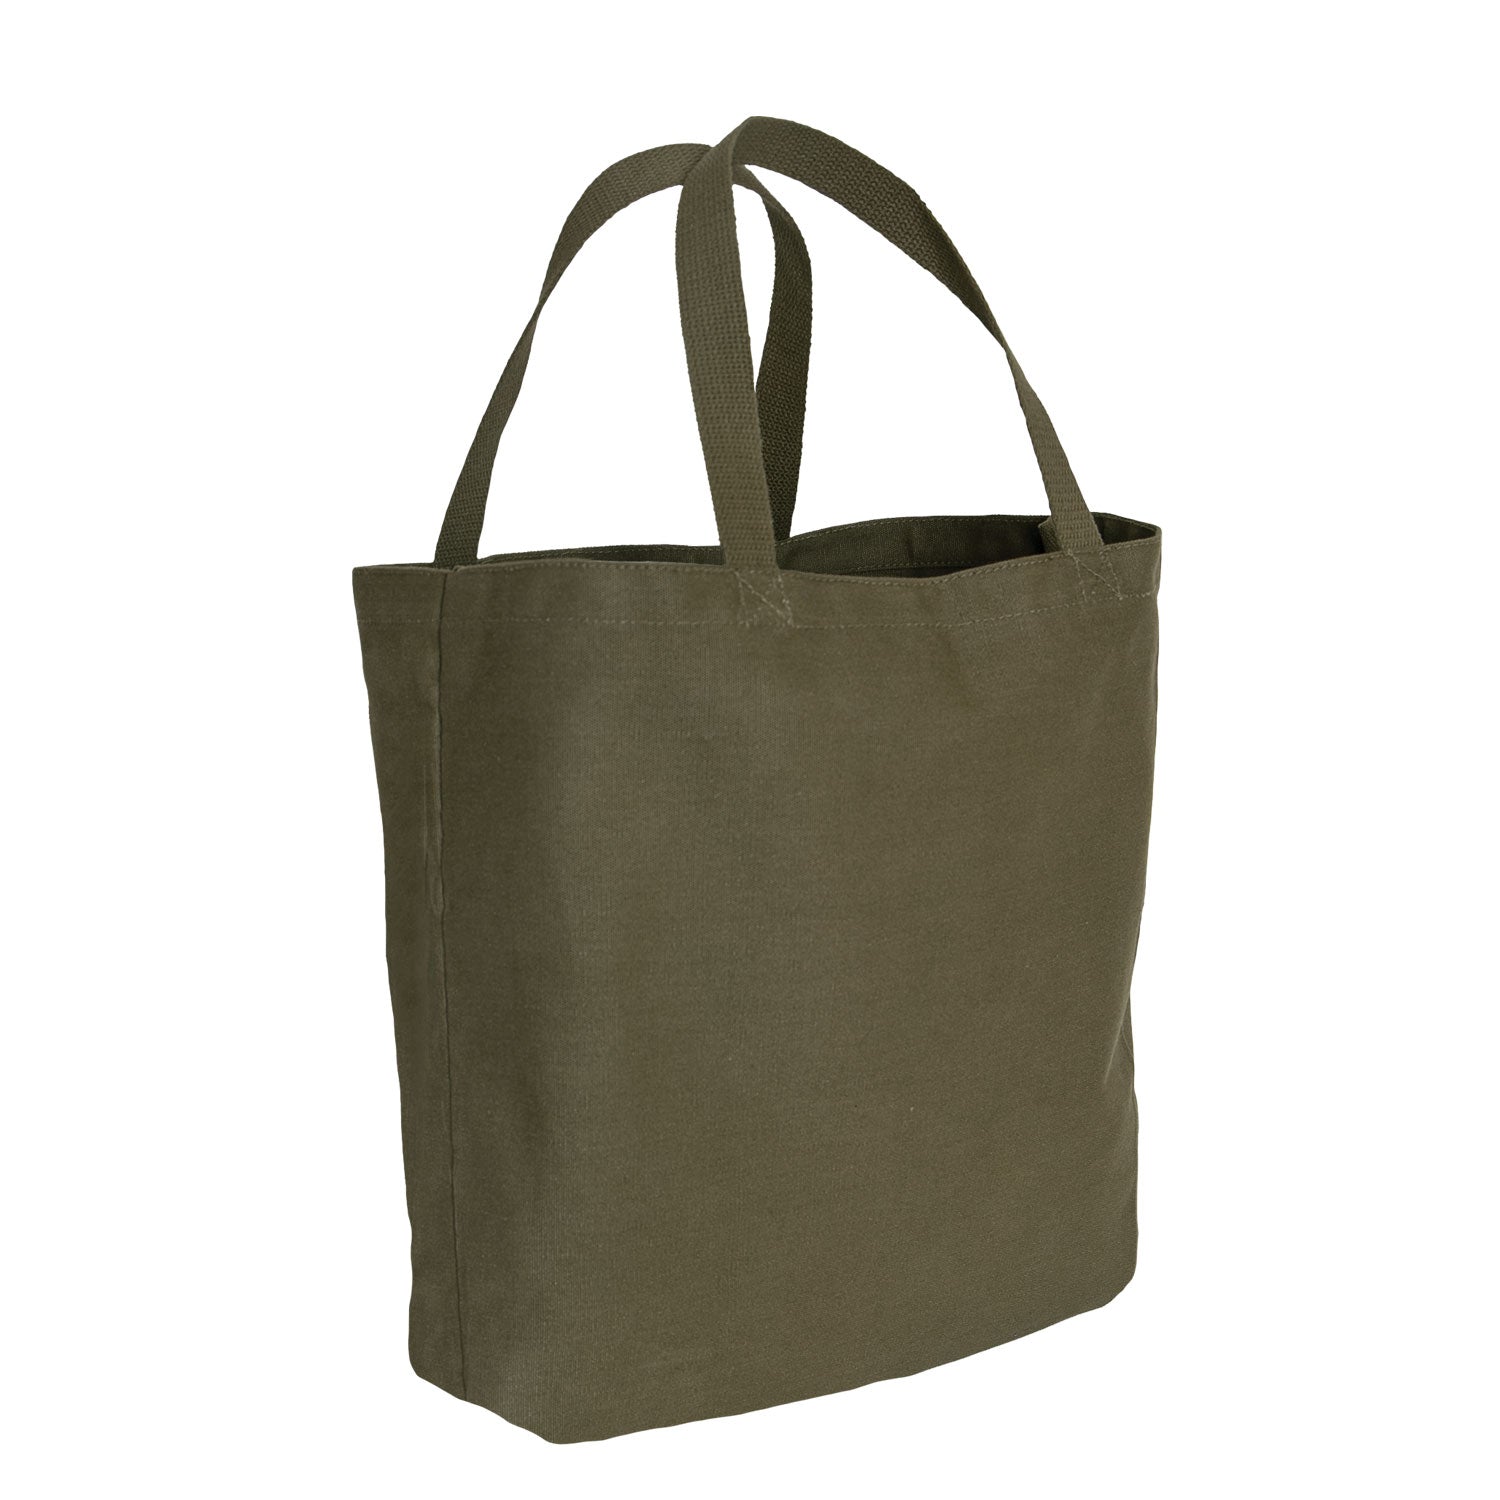 Milspec Canvas Camo And Solid Tote Bag Gifts For Her MilTac Tactical Military Outdoor Gear Australia